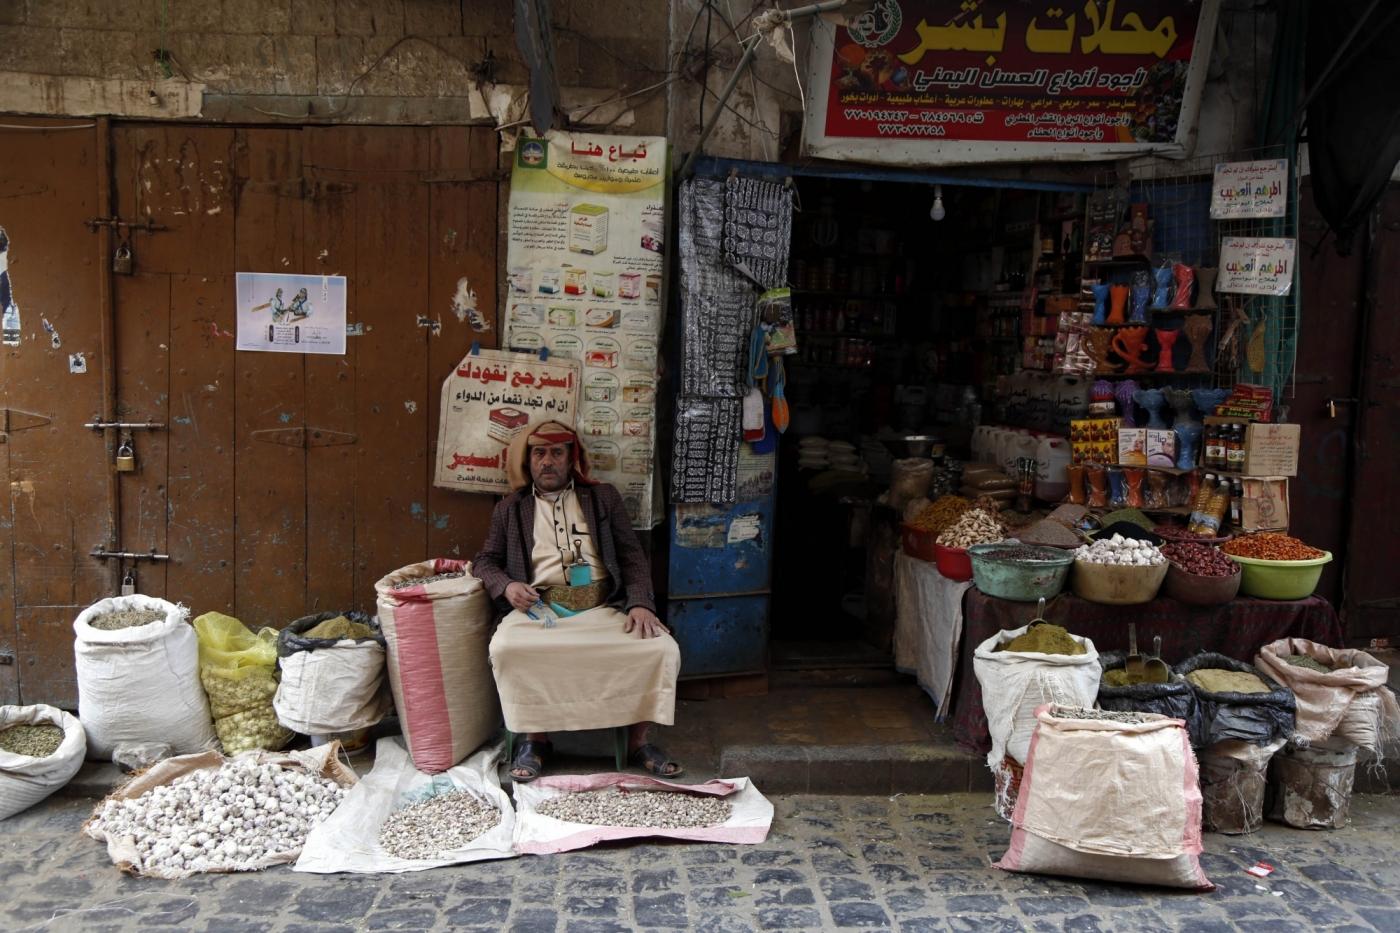 SANAA, Sept. 19, 2018 (Xinhua) -- A Yemeni seller waits for customers at a market in Sanaa, Yemen, on Sept. 19, 2018. In the historical old city of Yemen's capital Sanaa, people here are suffering badly from war and air-sea-land blockade that has been devastating lives of more than 25 million population for over three years. (Xinhua/Mohammed Mohammed/IANS) by .